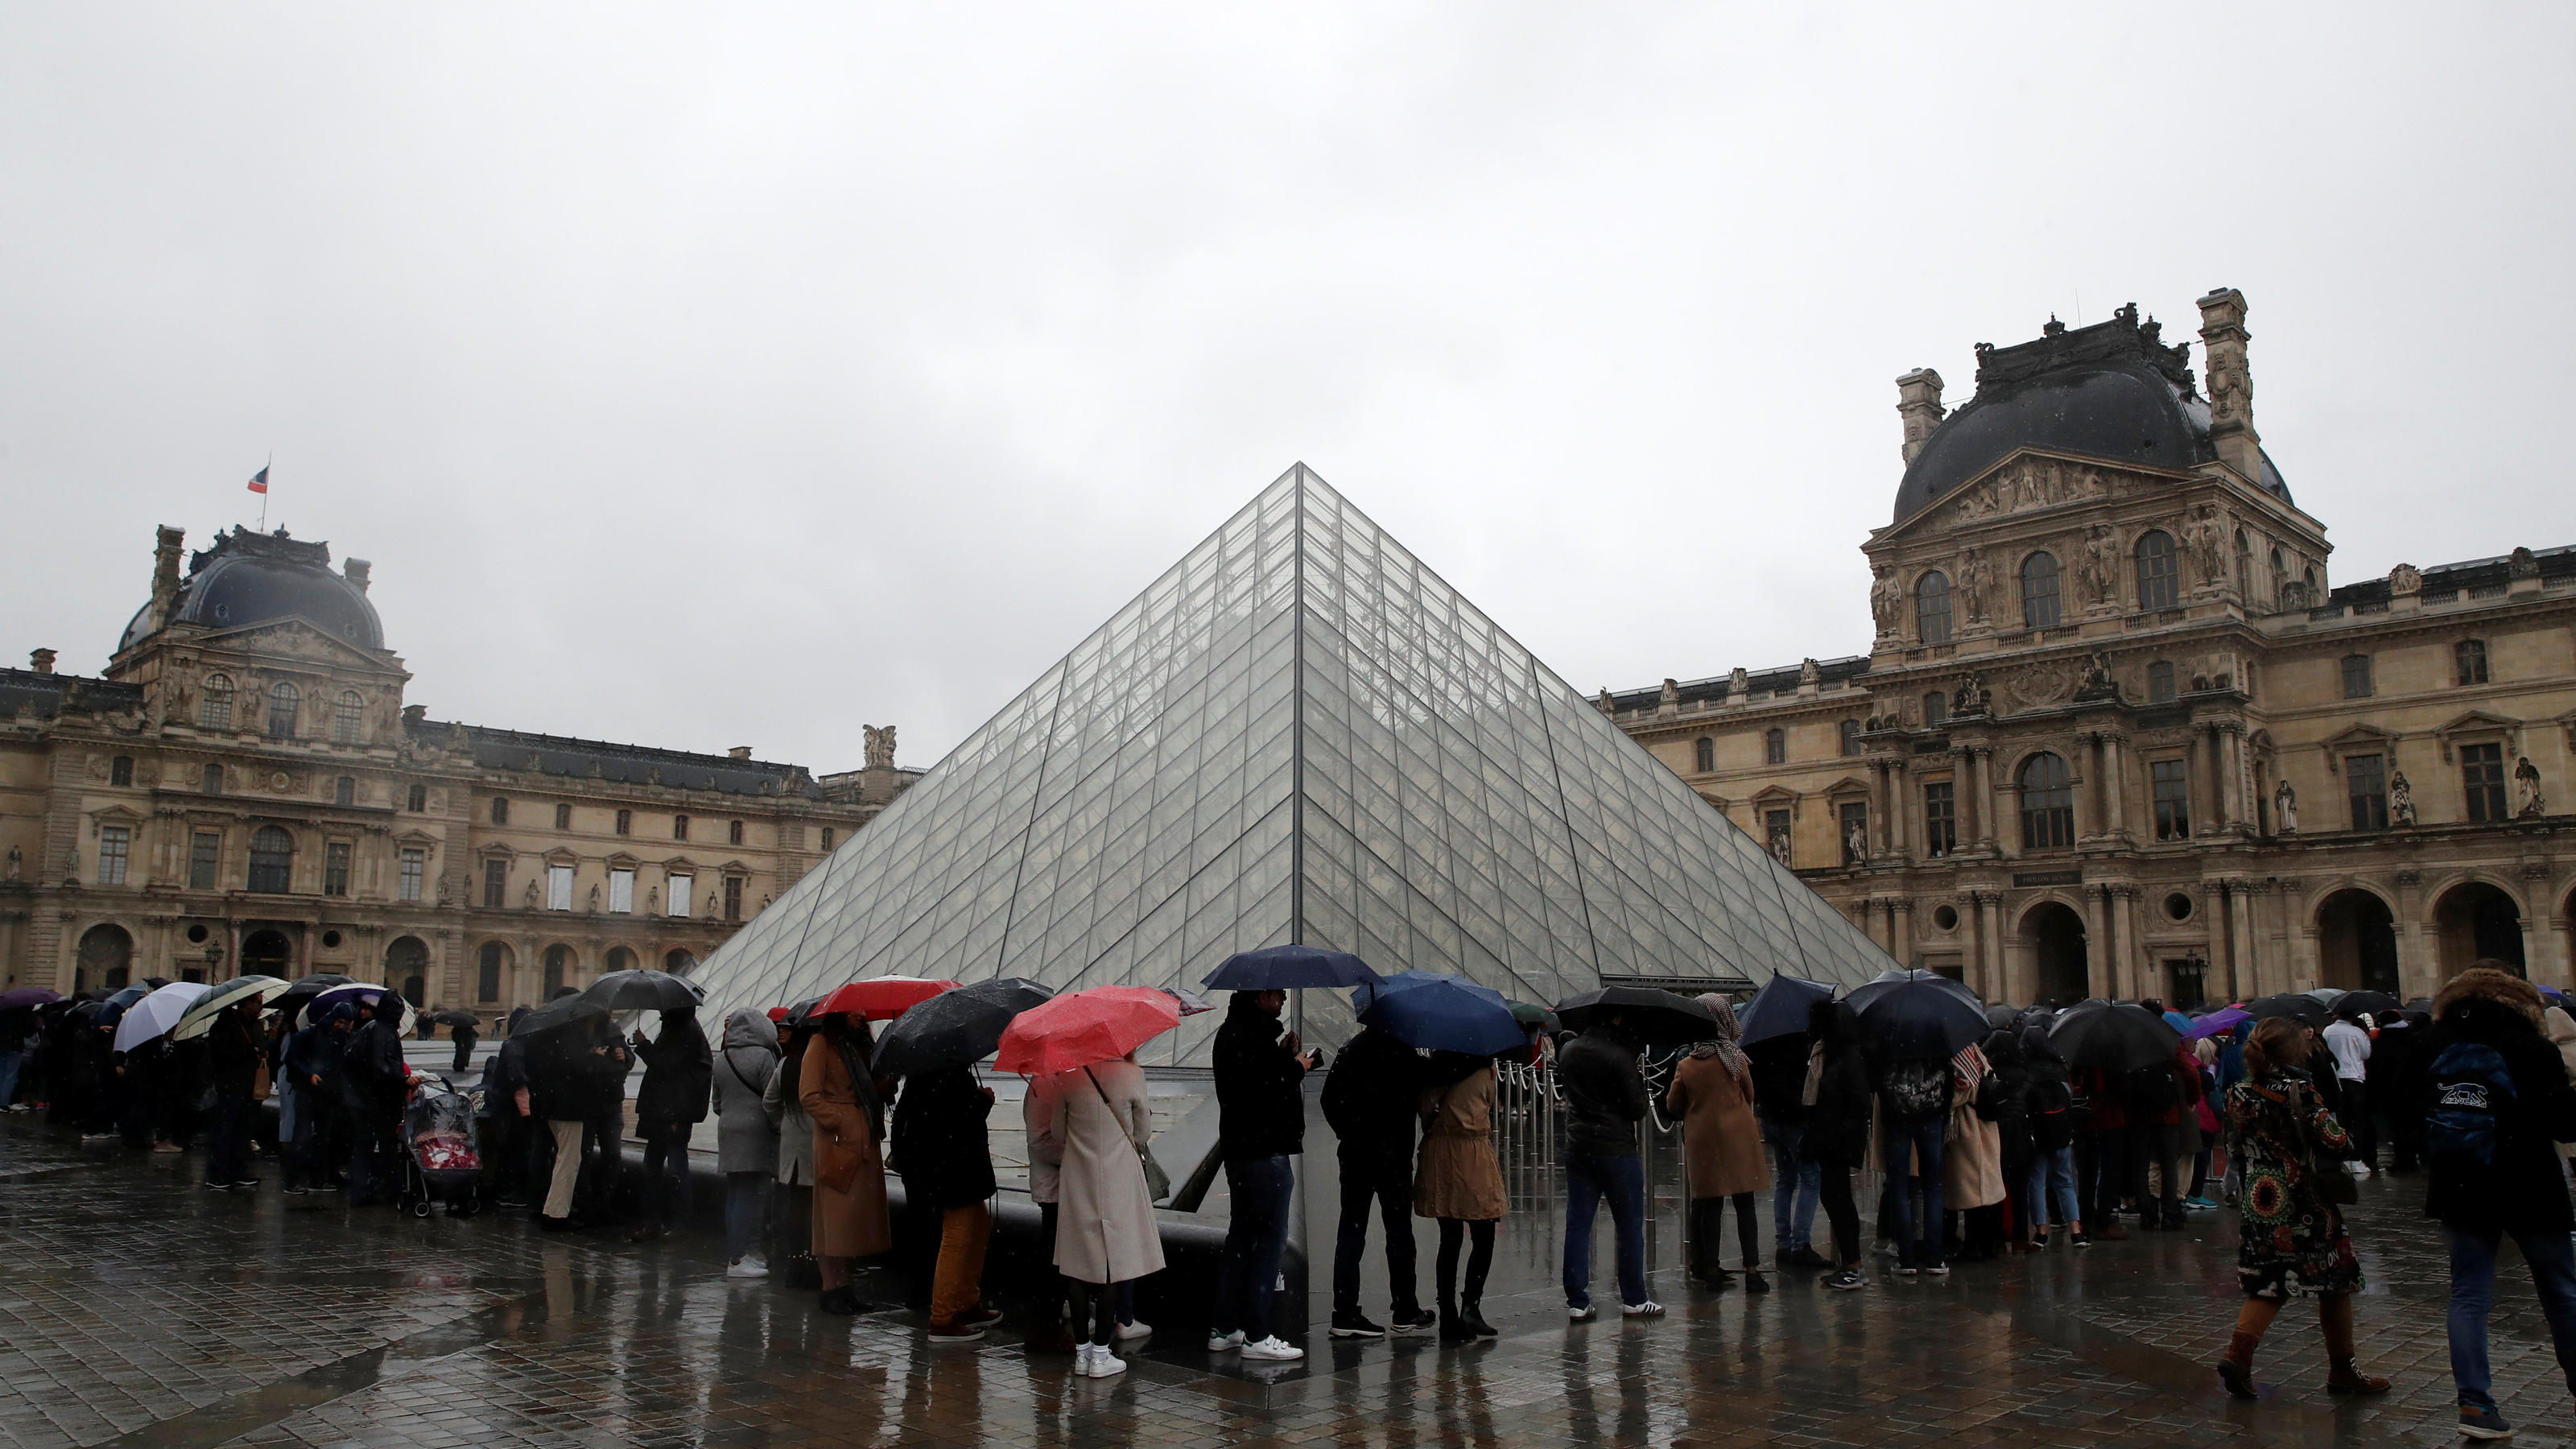 People line up at the Louvre Museum as the staff closed the museum during a staff meeting about the coronavirus outbreak, in Paris, France, March 1, 2020. REUTERS/Gonzalo Fuentes